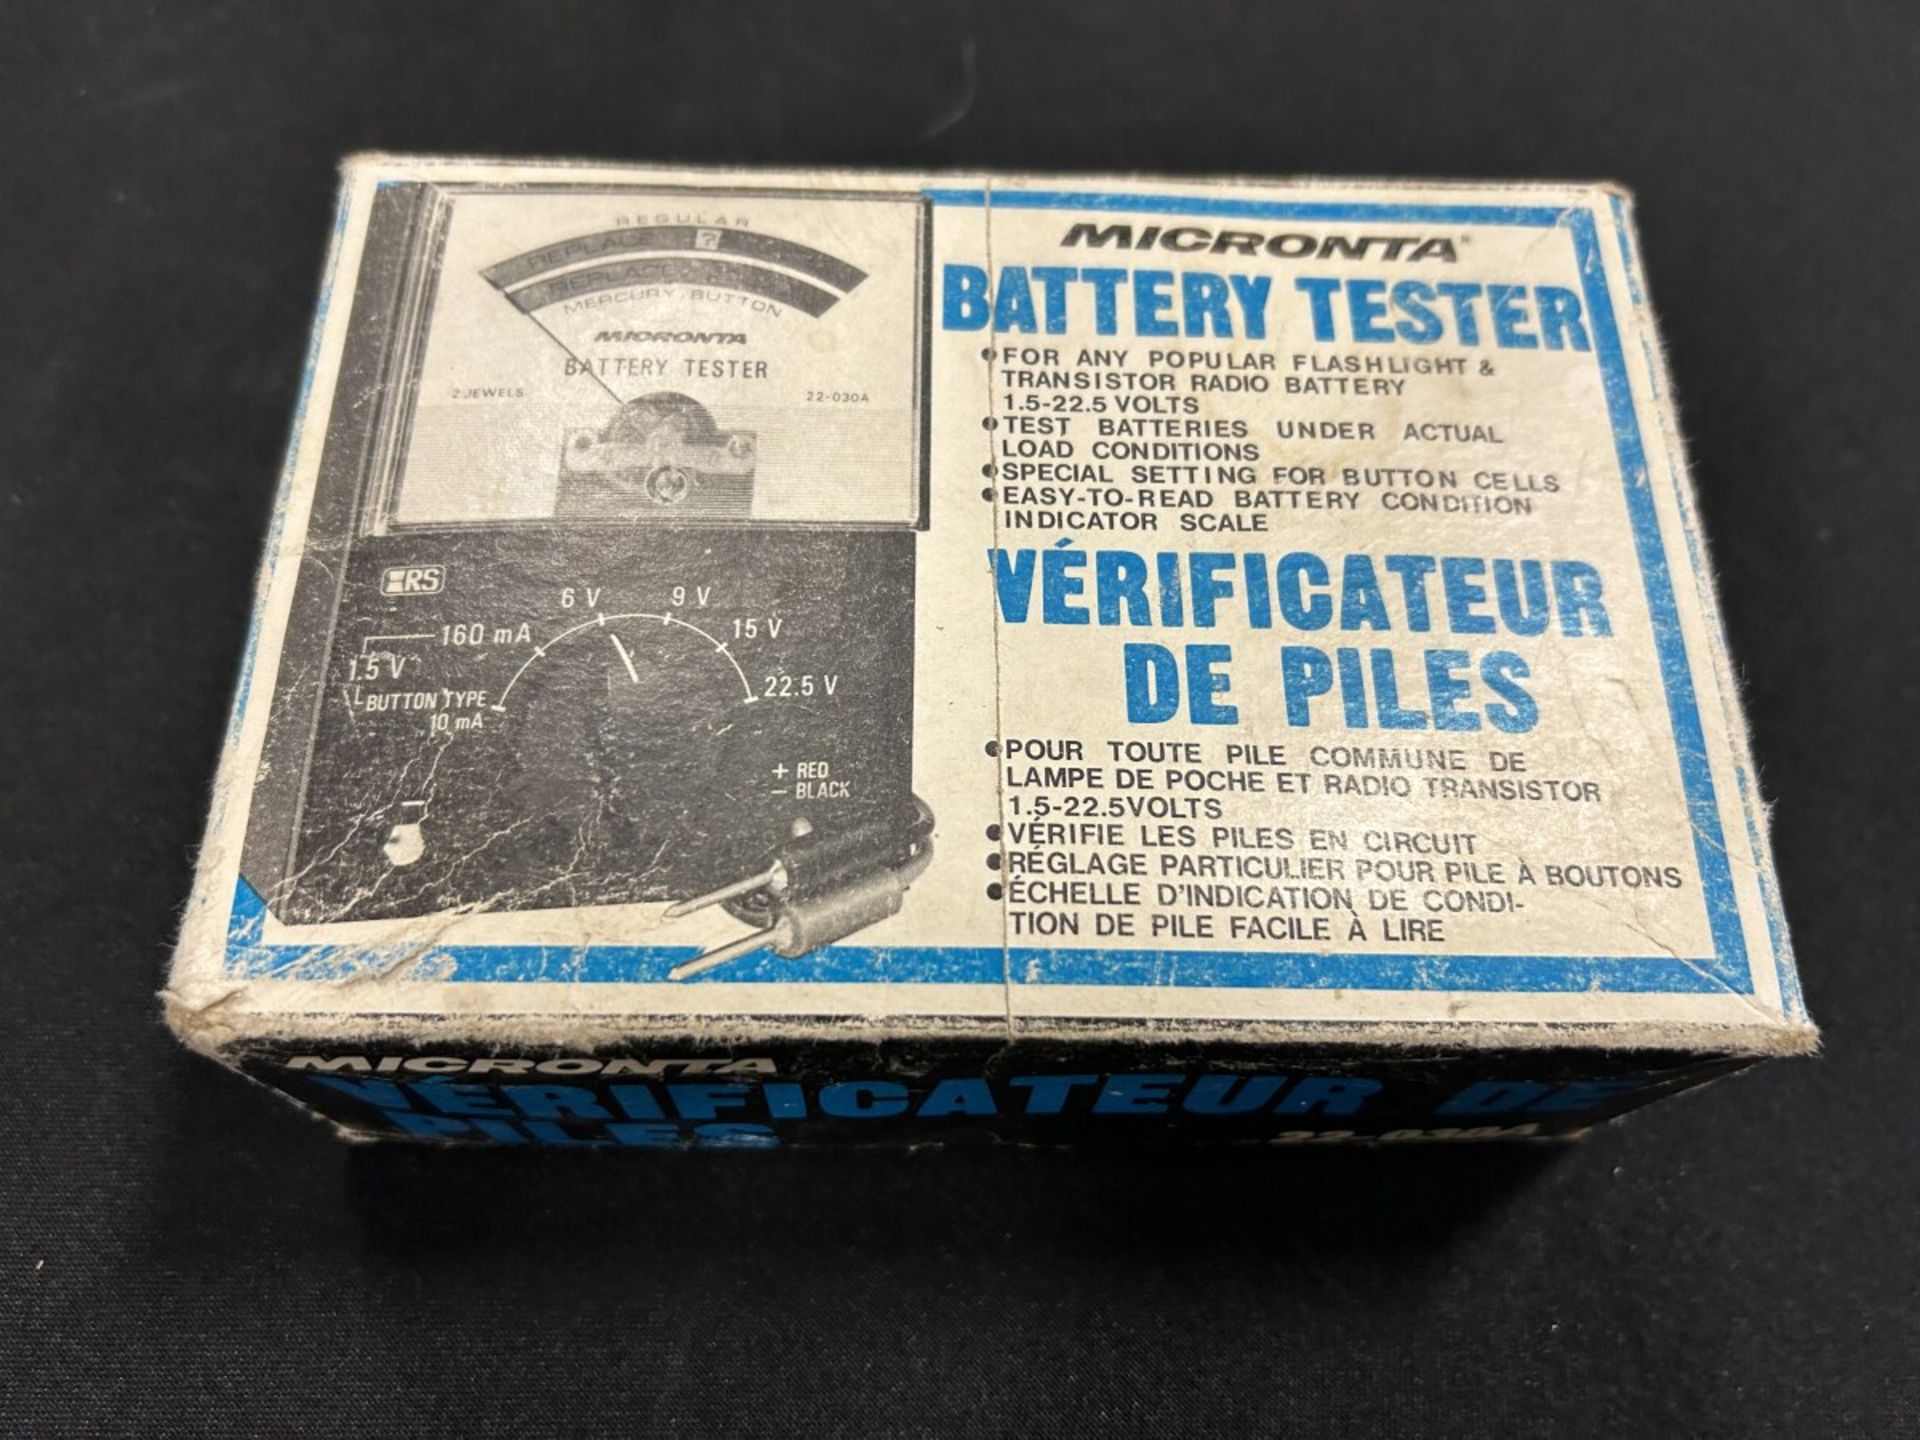 MICRONTA BATTERY TESTER W/ ASSORTED WIRE CONNECTORS - Image 6 of 6